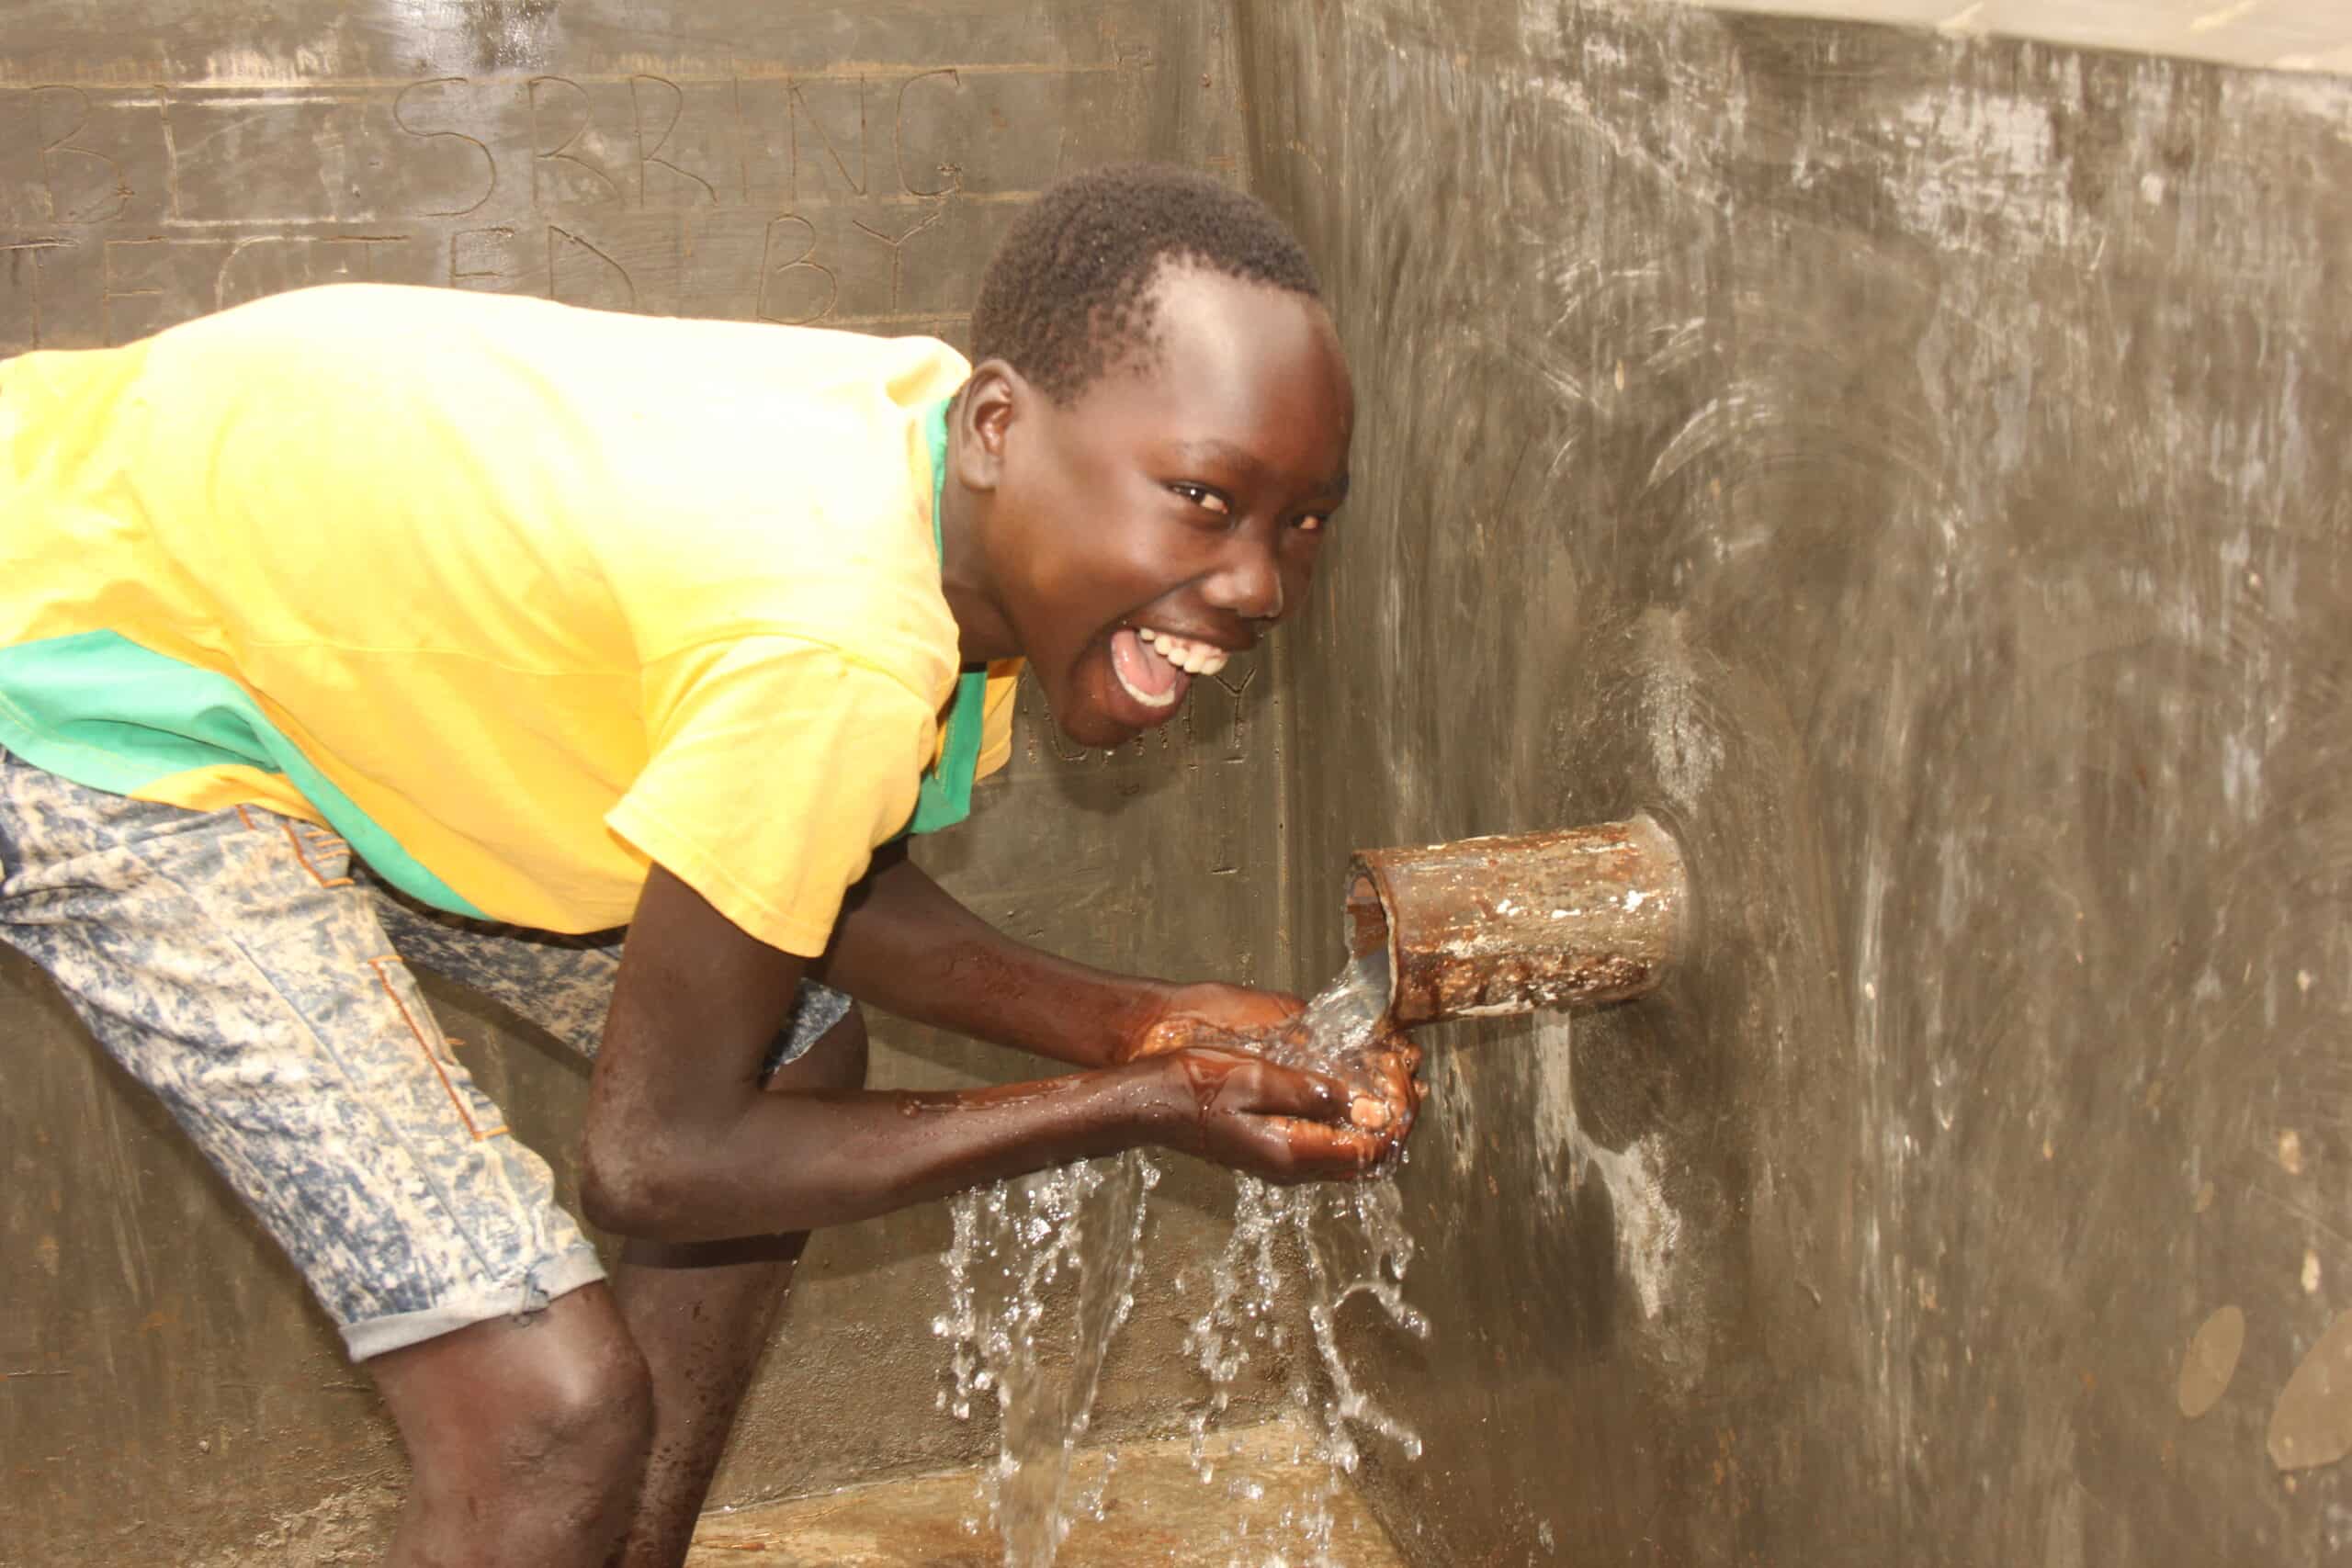 The joy of accessing clean, safe water